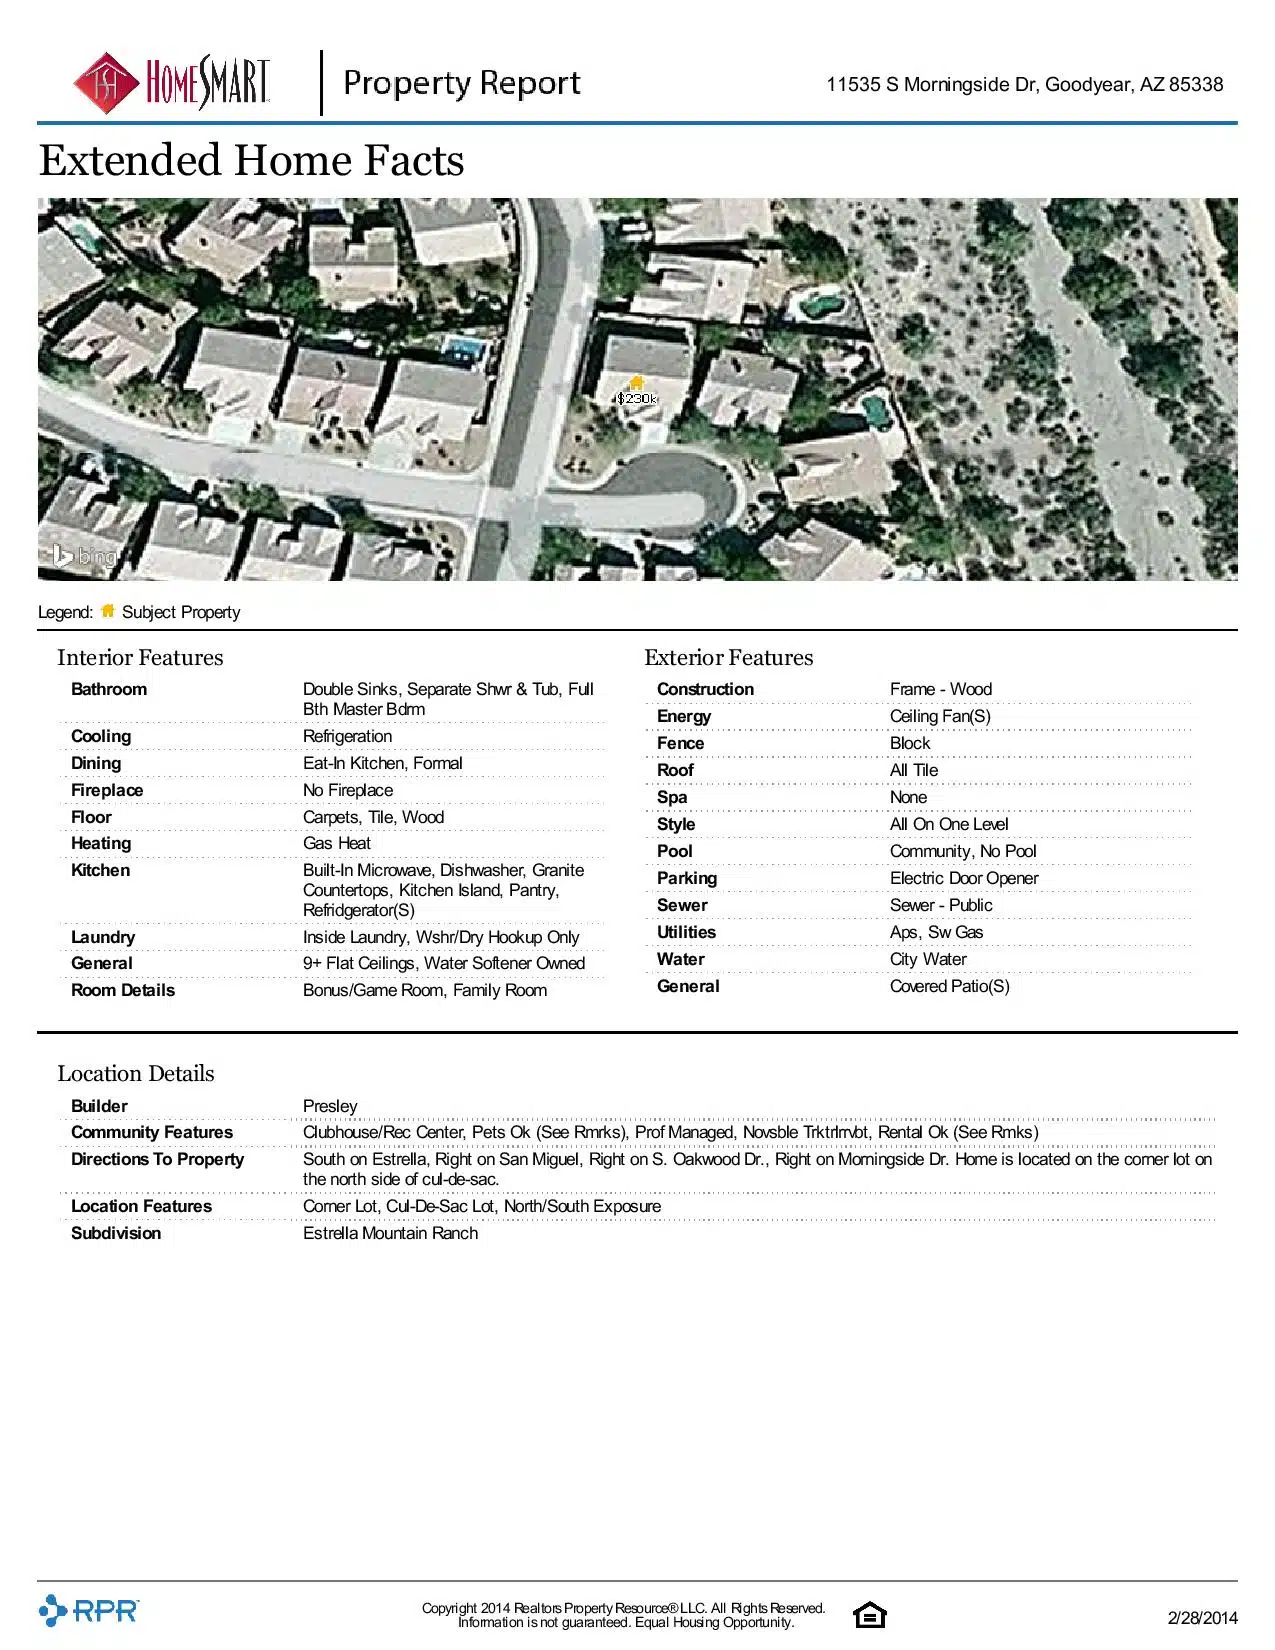 11535-S-Morningside-Dr-Goodyear-AZ-85338-page-004